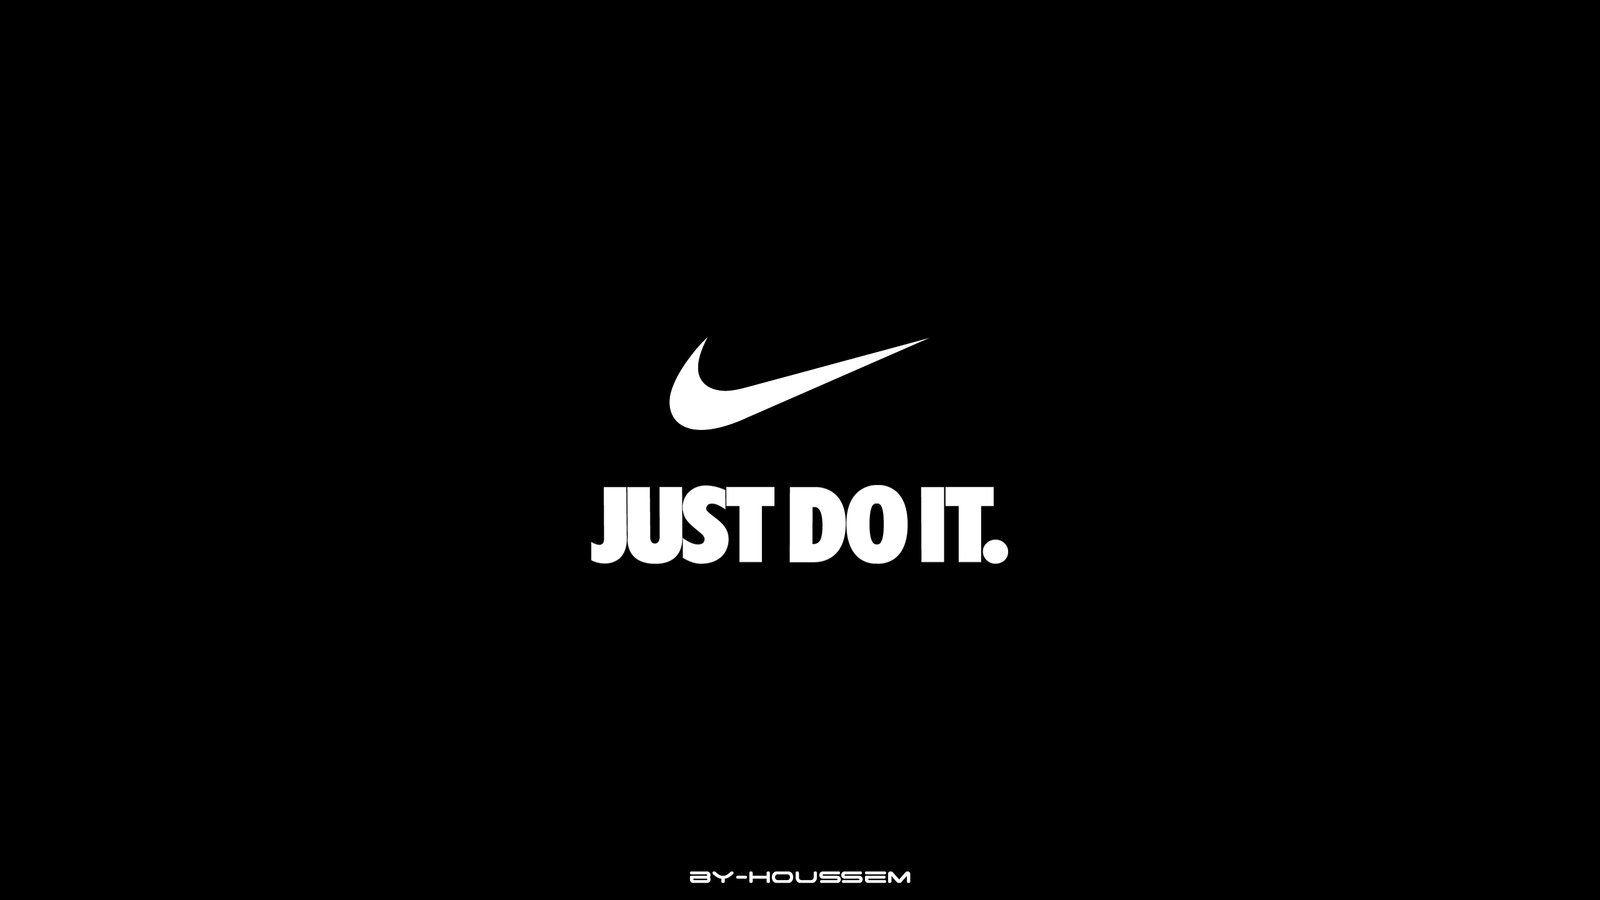 Best Just Do It Wallpaper High Quality Widescreen Nike Afari Of Pc